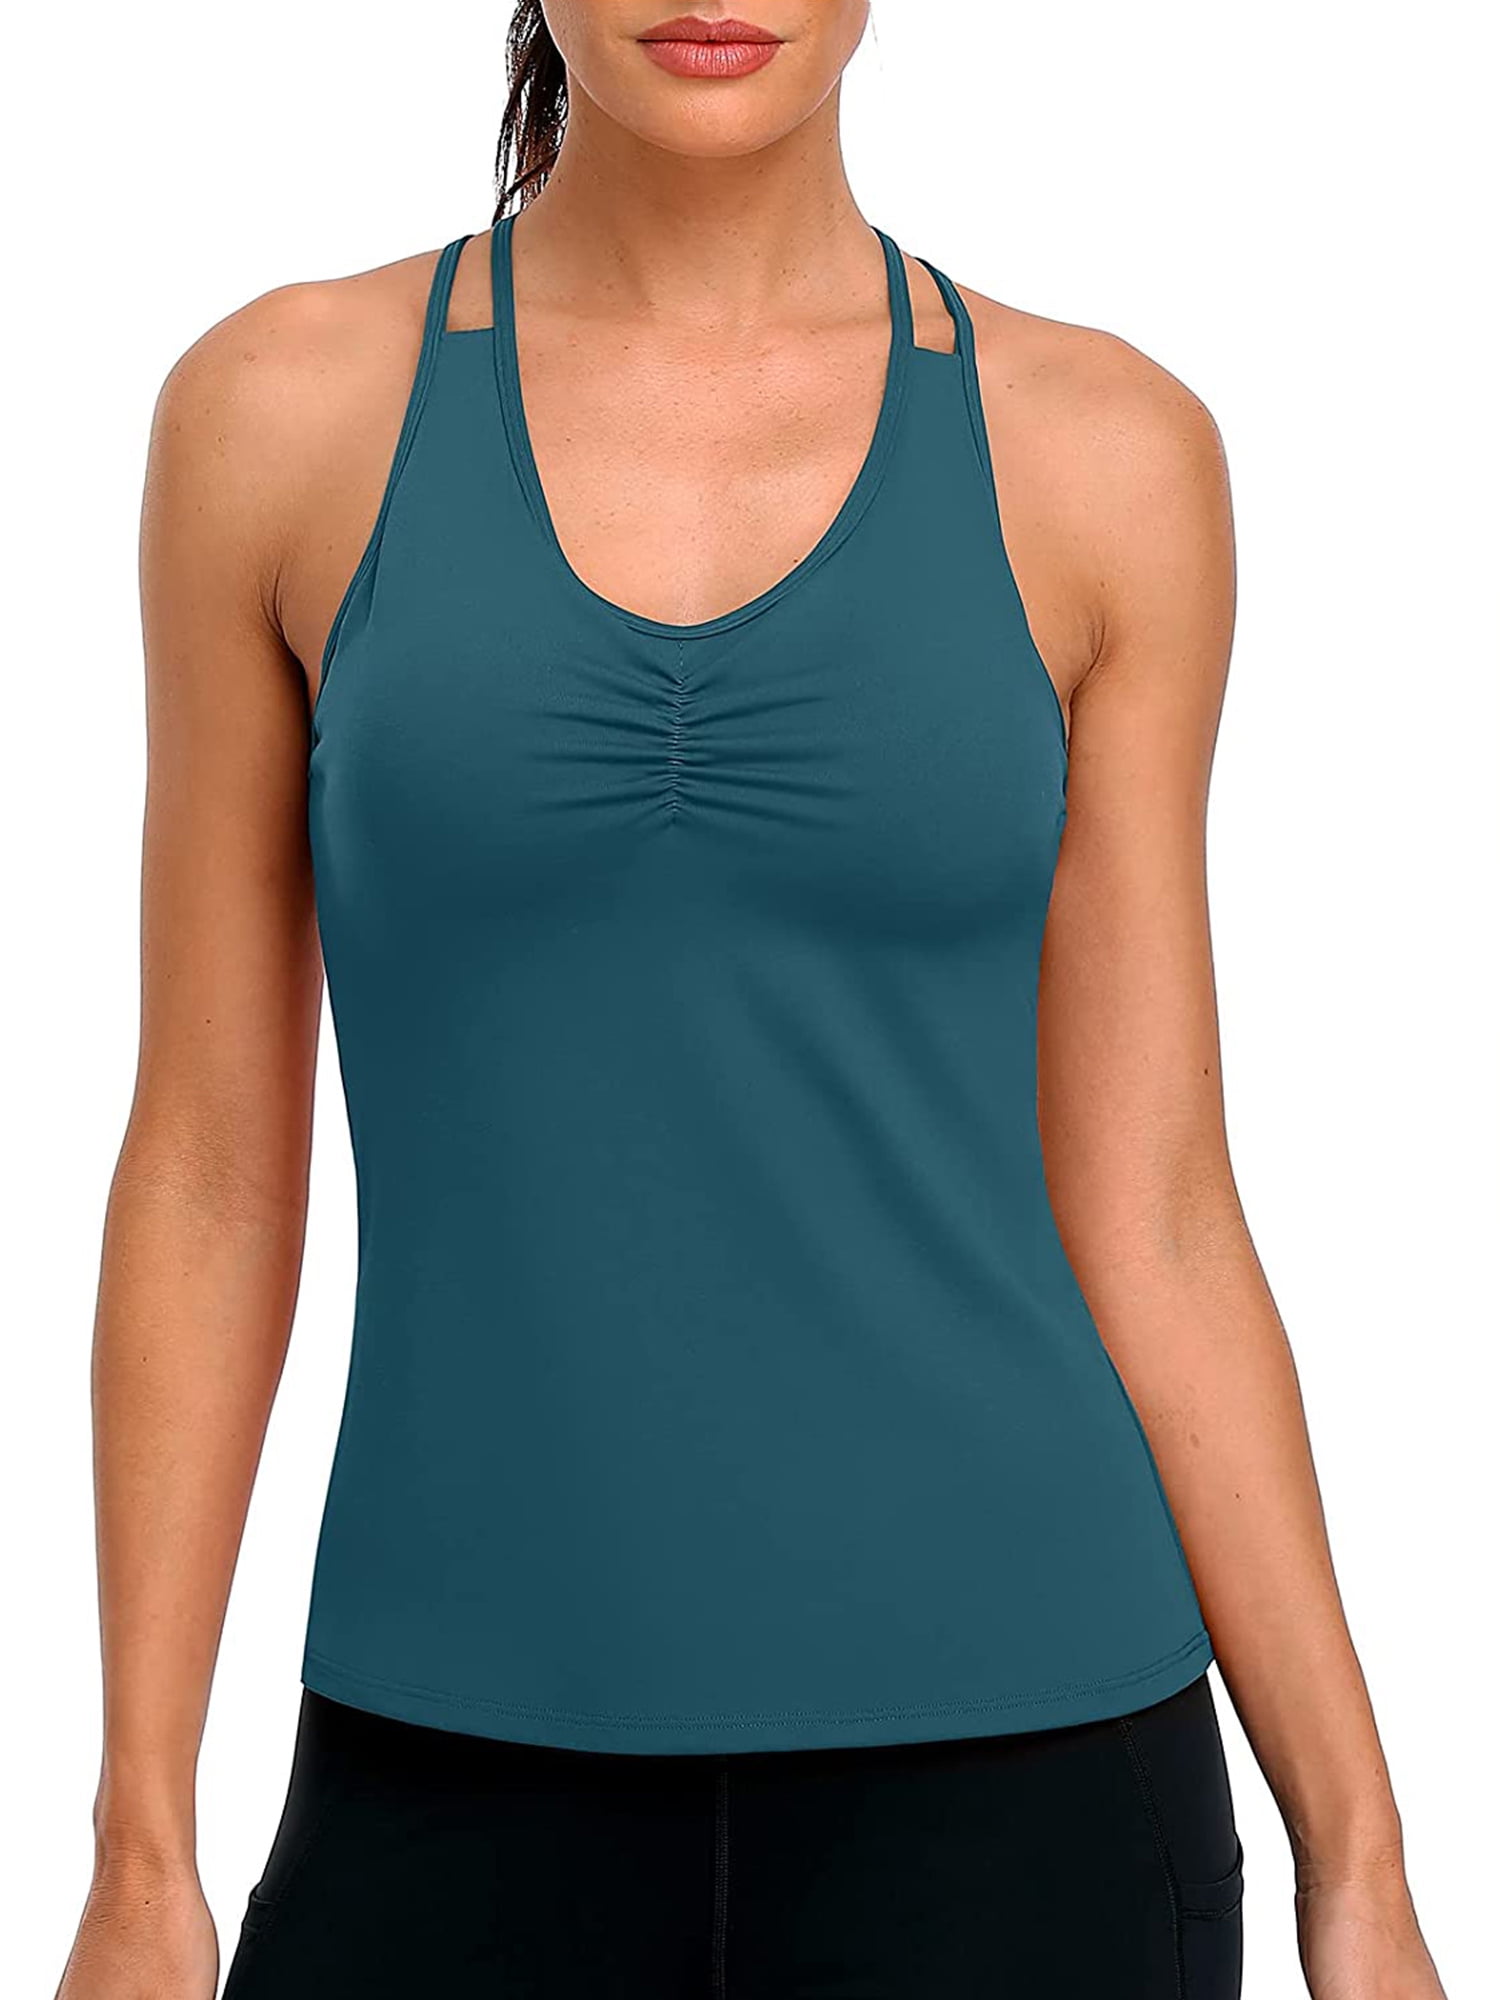 Yoga Tank Tops for Women Built in Bra Strappy Back Workout Tank Top Shelf Bra Yoga Shirts Built in Sports Bra Compression Tops 